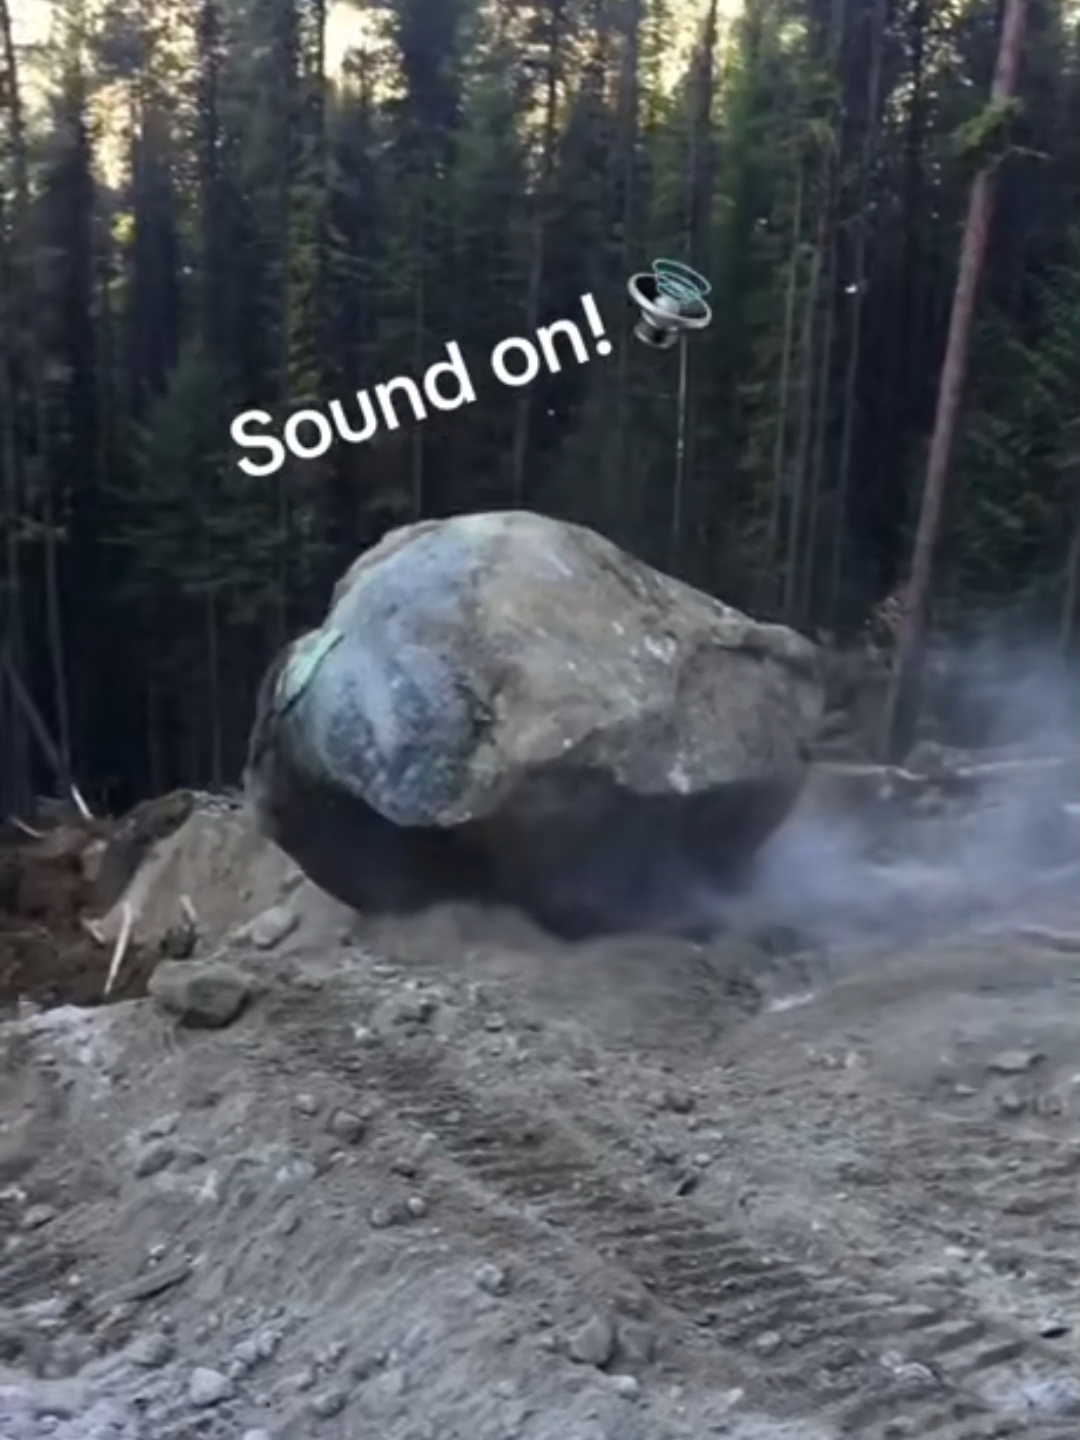 Nature's raw power on display!  This unstoppable boulder is on a CRUSHING rampage, leaving a trail of epic breaking sounds in its wake. What incredible force of nature could cause this?   Watch to the end and see the earth-shattering destruction! #TikTok #FYP #Nature, #PowerOfNature, #Boulder, #BreakingSounds, #Epic, #Geology #VlogVaultVariety